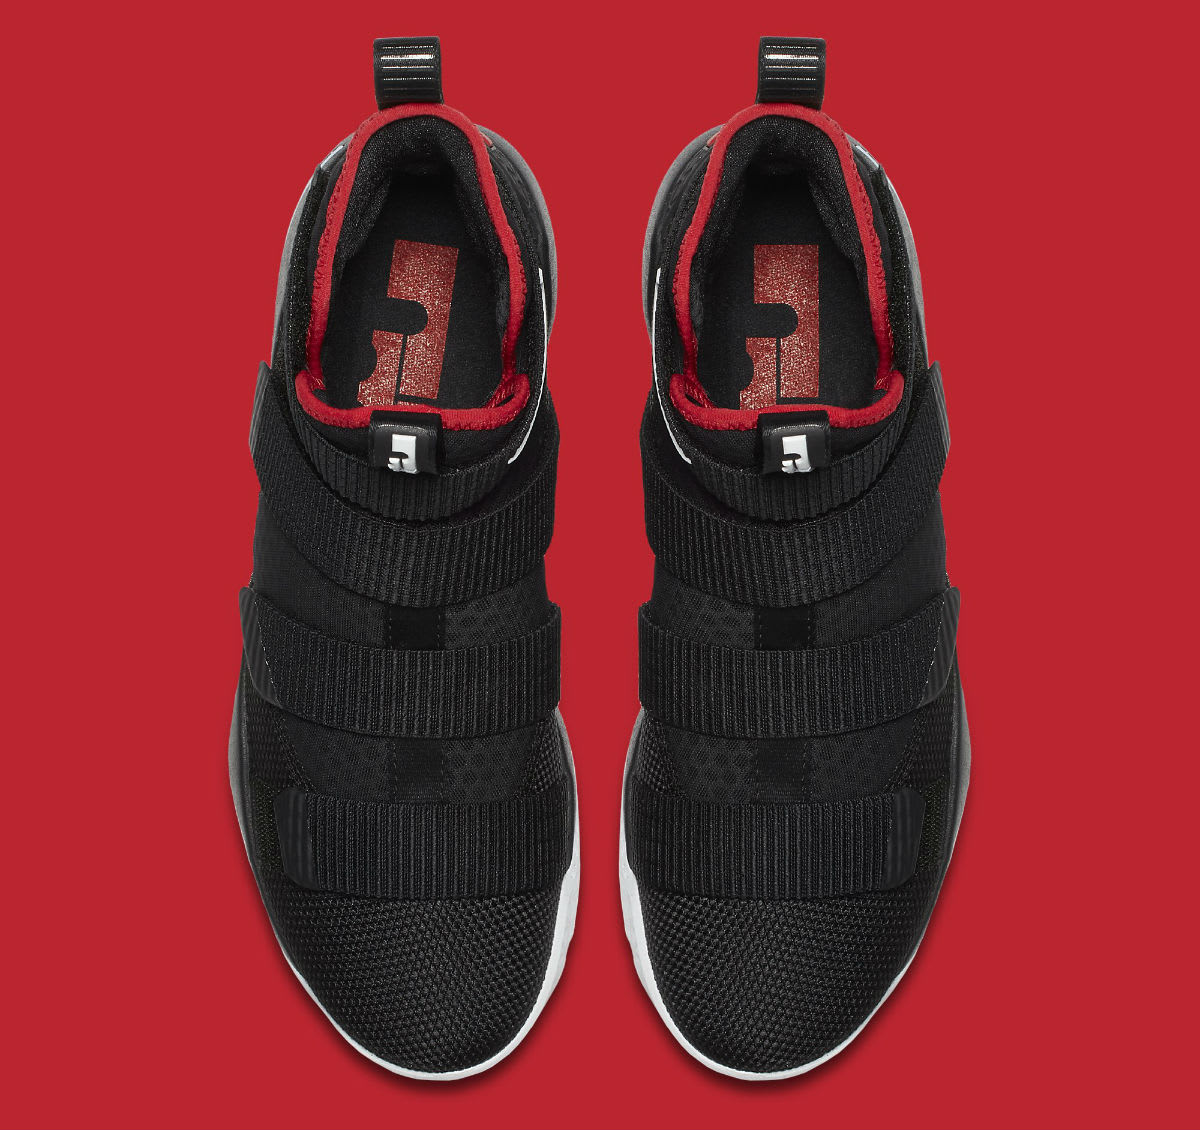 Nike Zoom LeBron Soldier 11 Bred